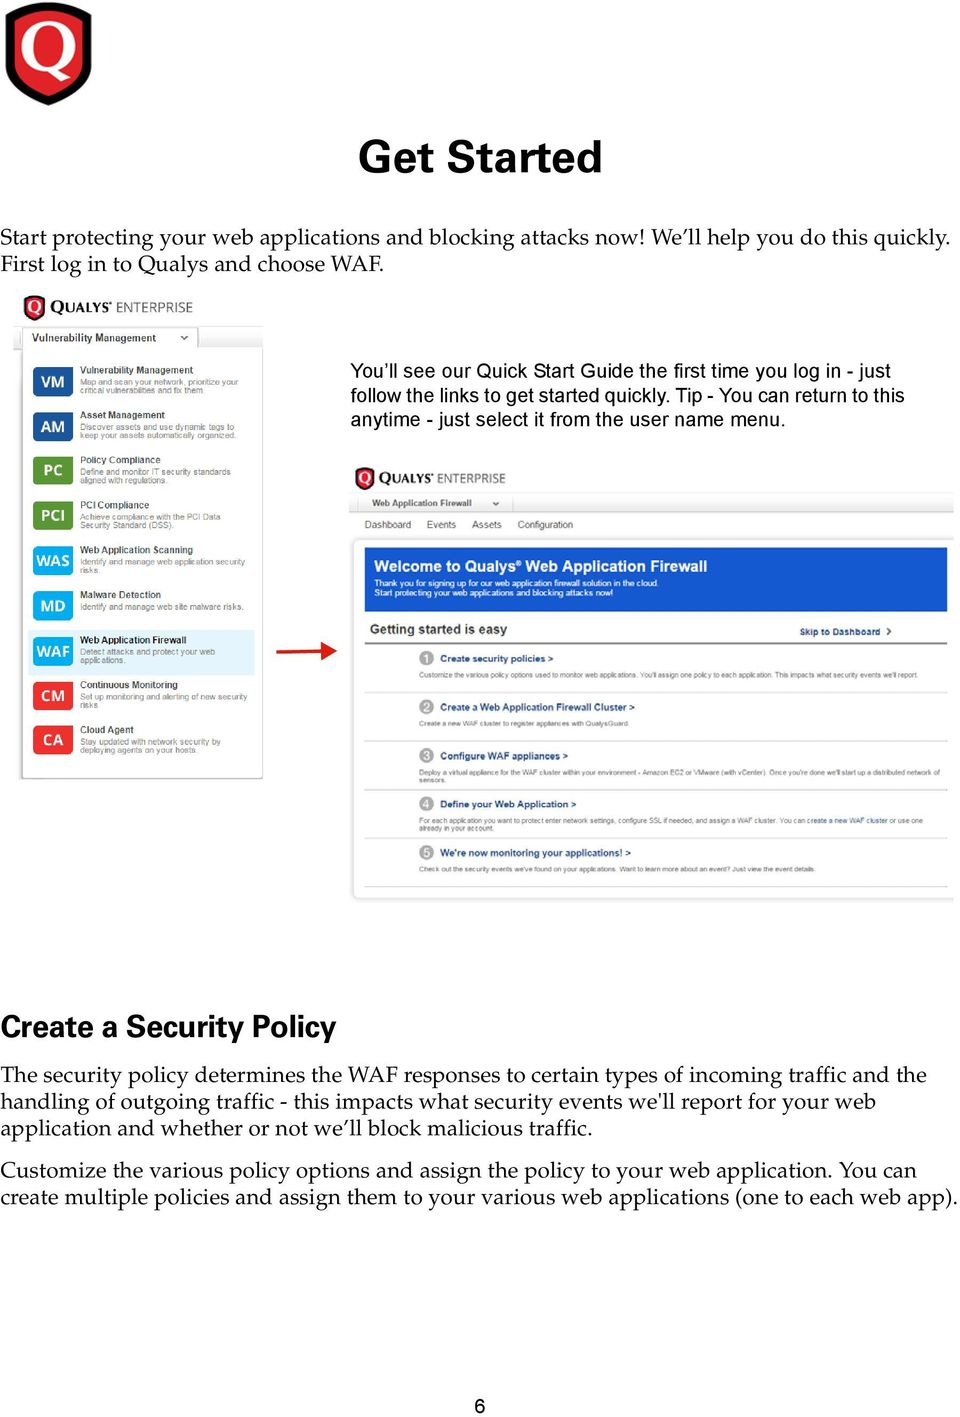 Create a Security Policy The security policy determines the WAF responses to certain types of incoming traffic and the handling of outgoing traffic - this impacts what security events we'll report